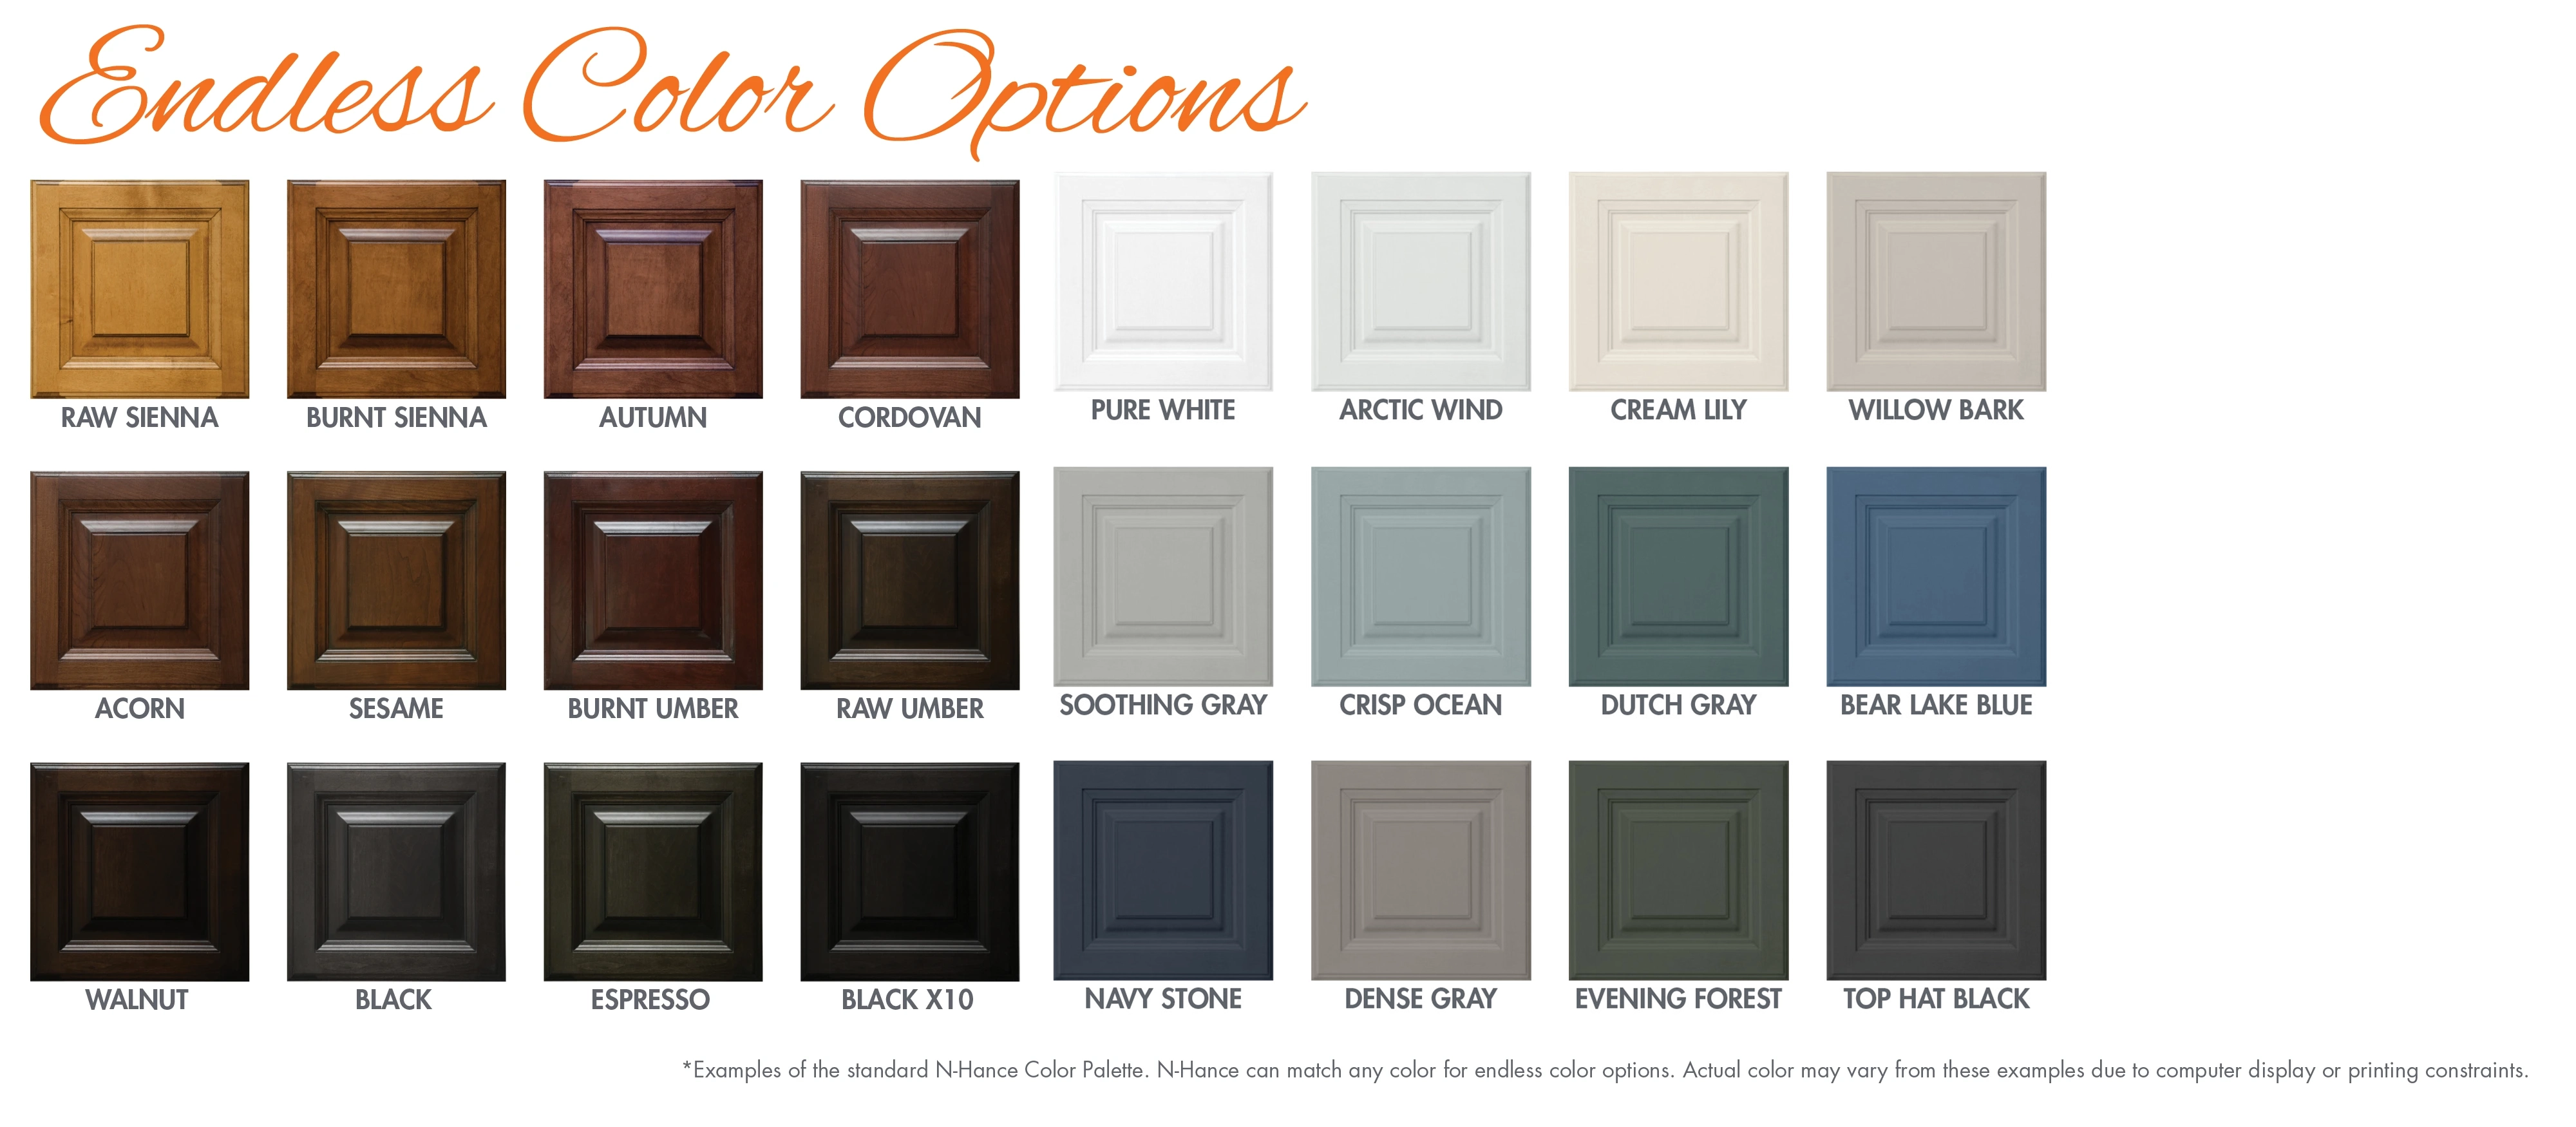 Text at the top reads Endless Color Options. Image shows 29 cabinet samples all painted in different colors that N-Hance offers.